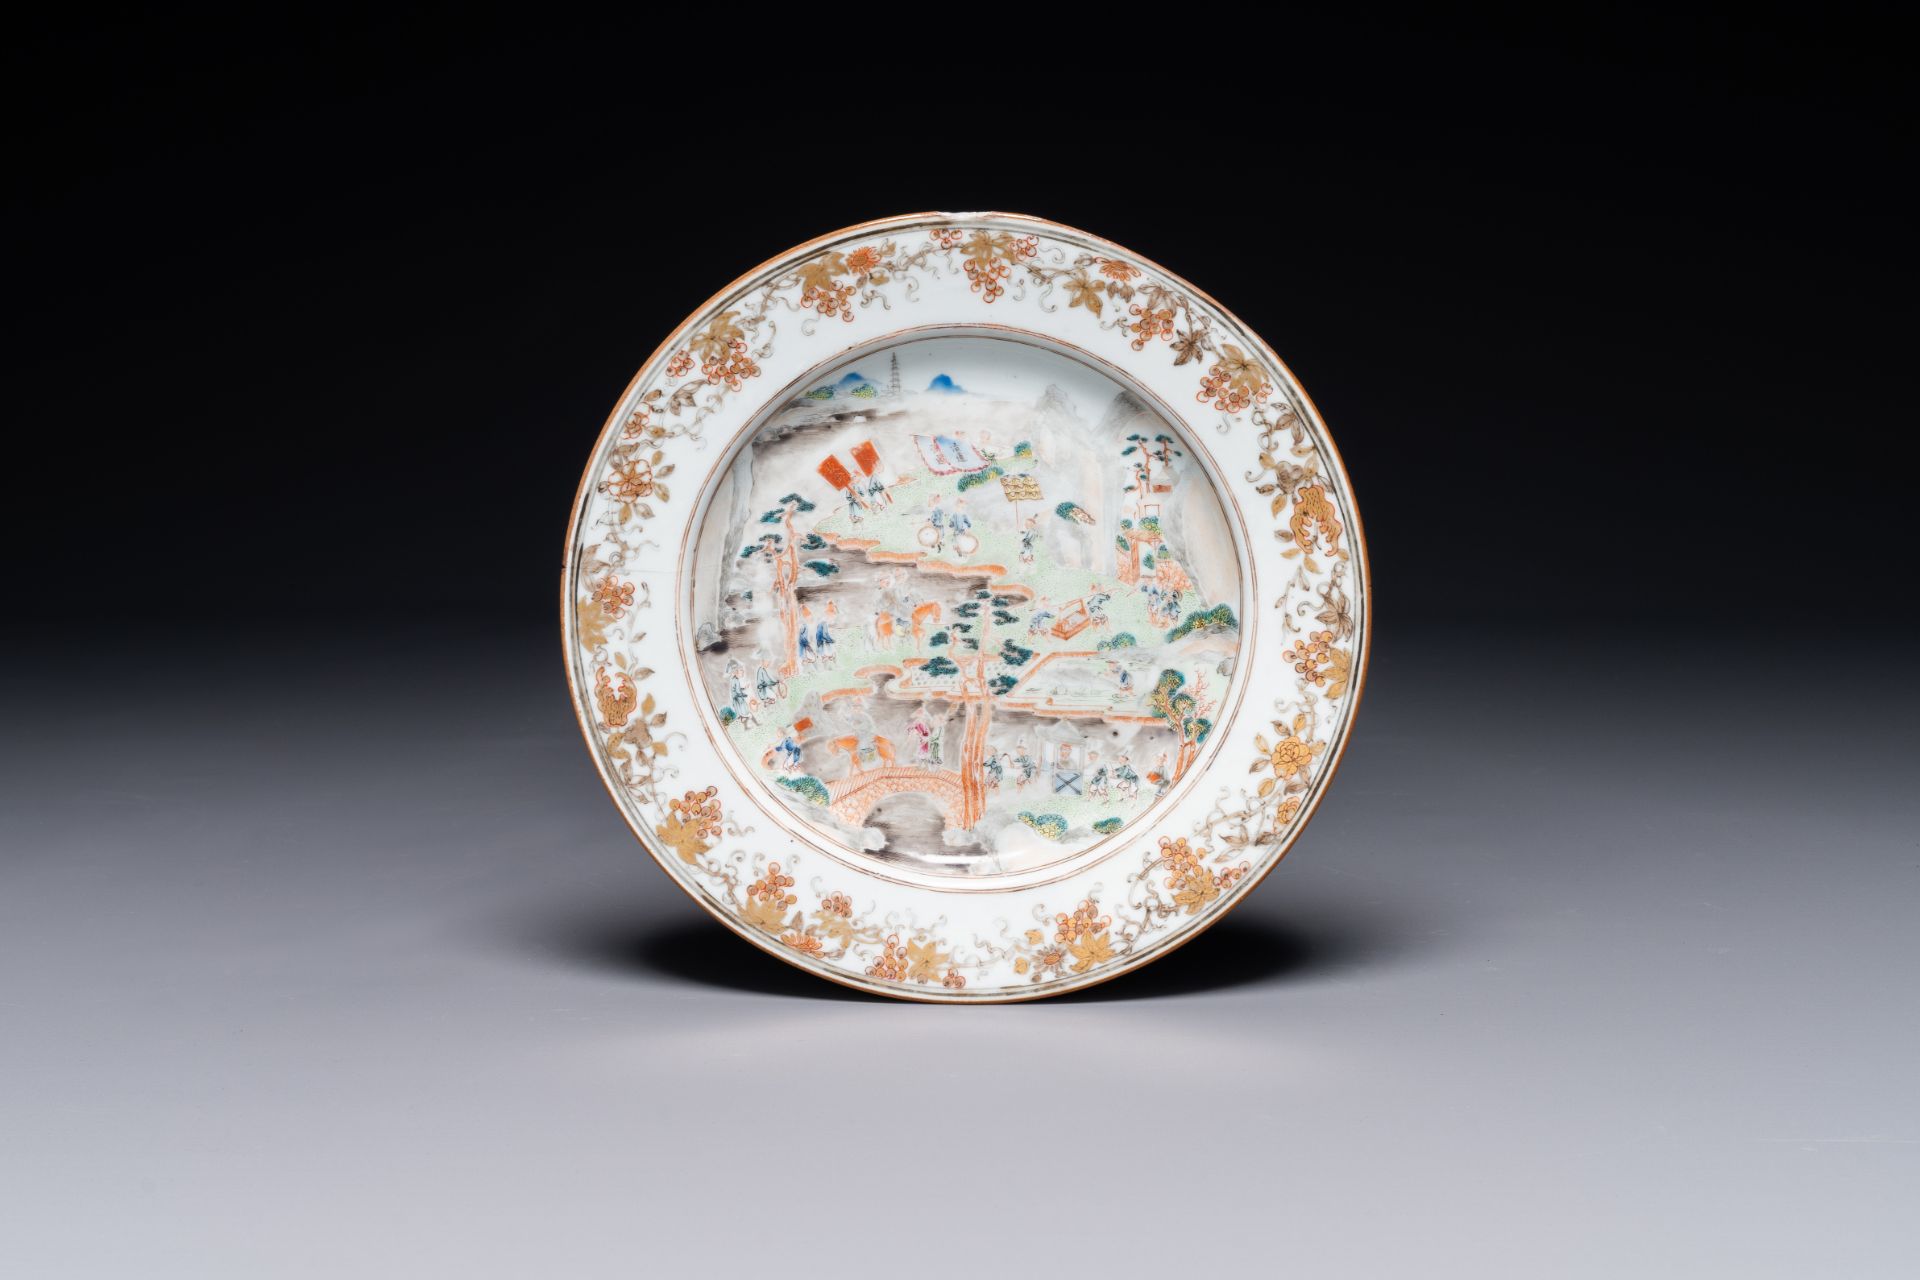 A rare Chinese Canton famille rose plate depicting an official traveling along the Pearl River towar